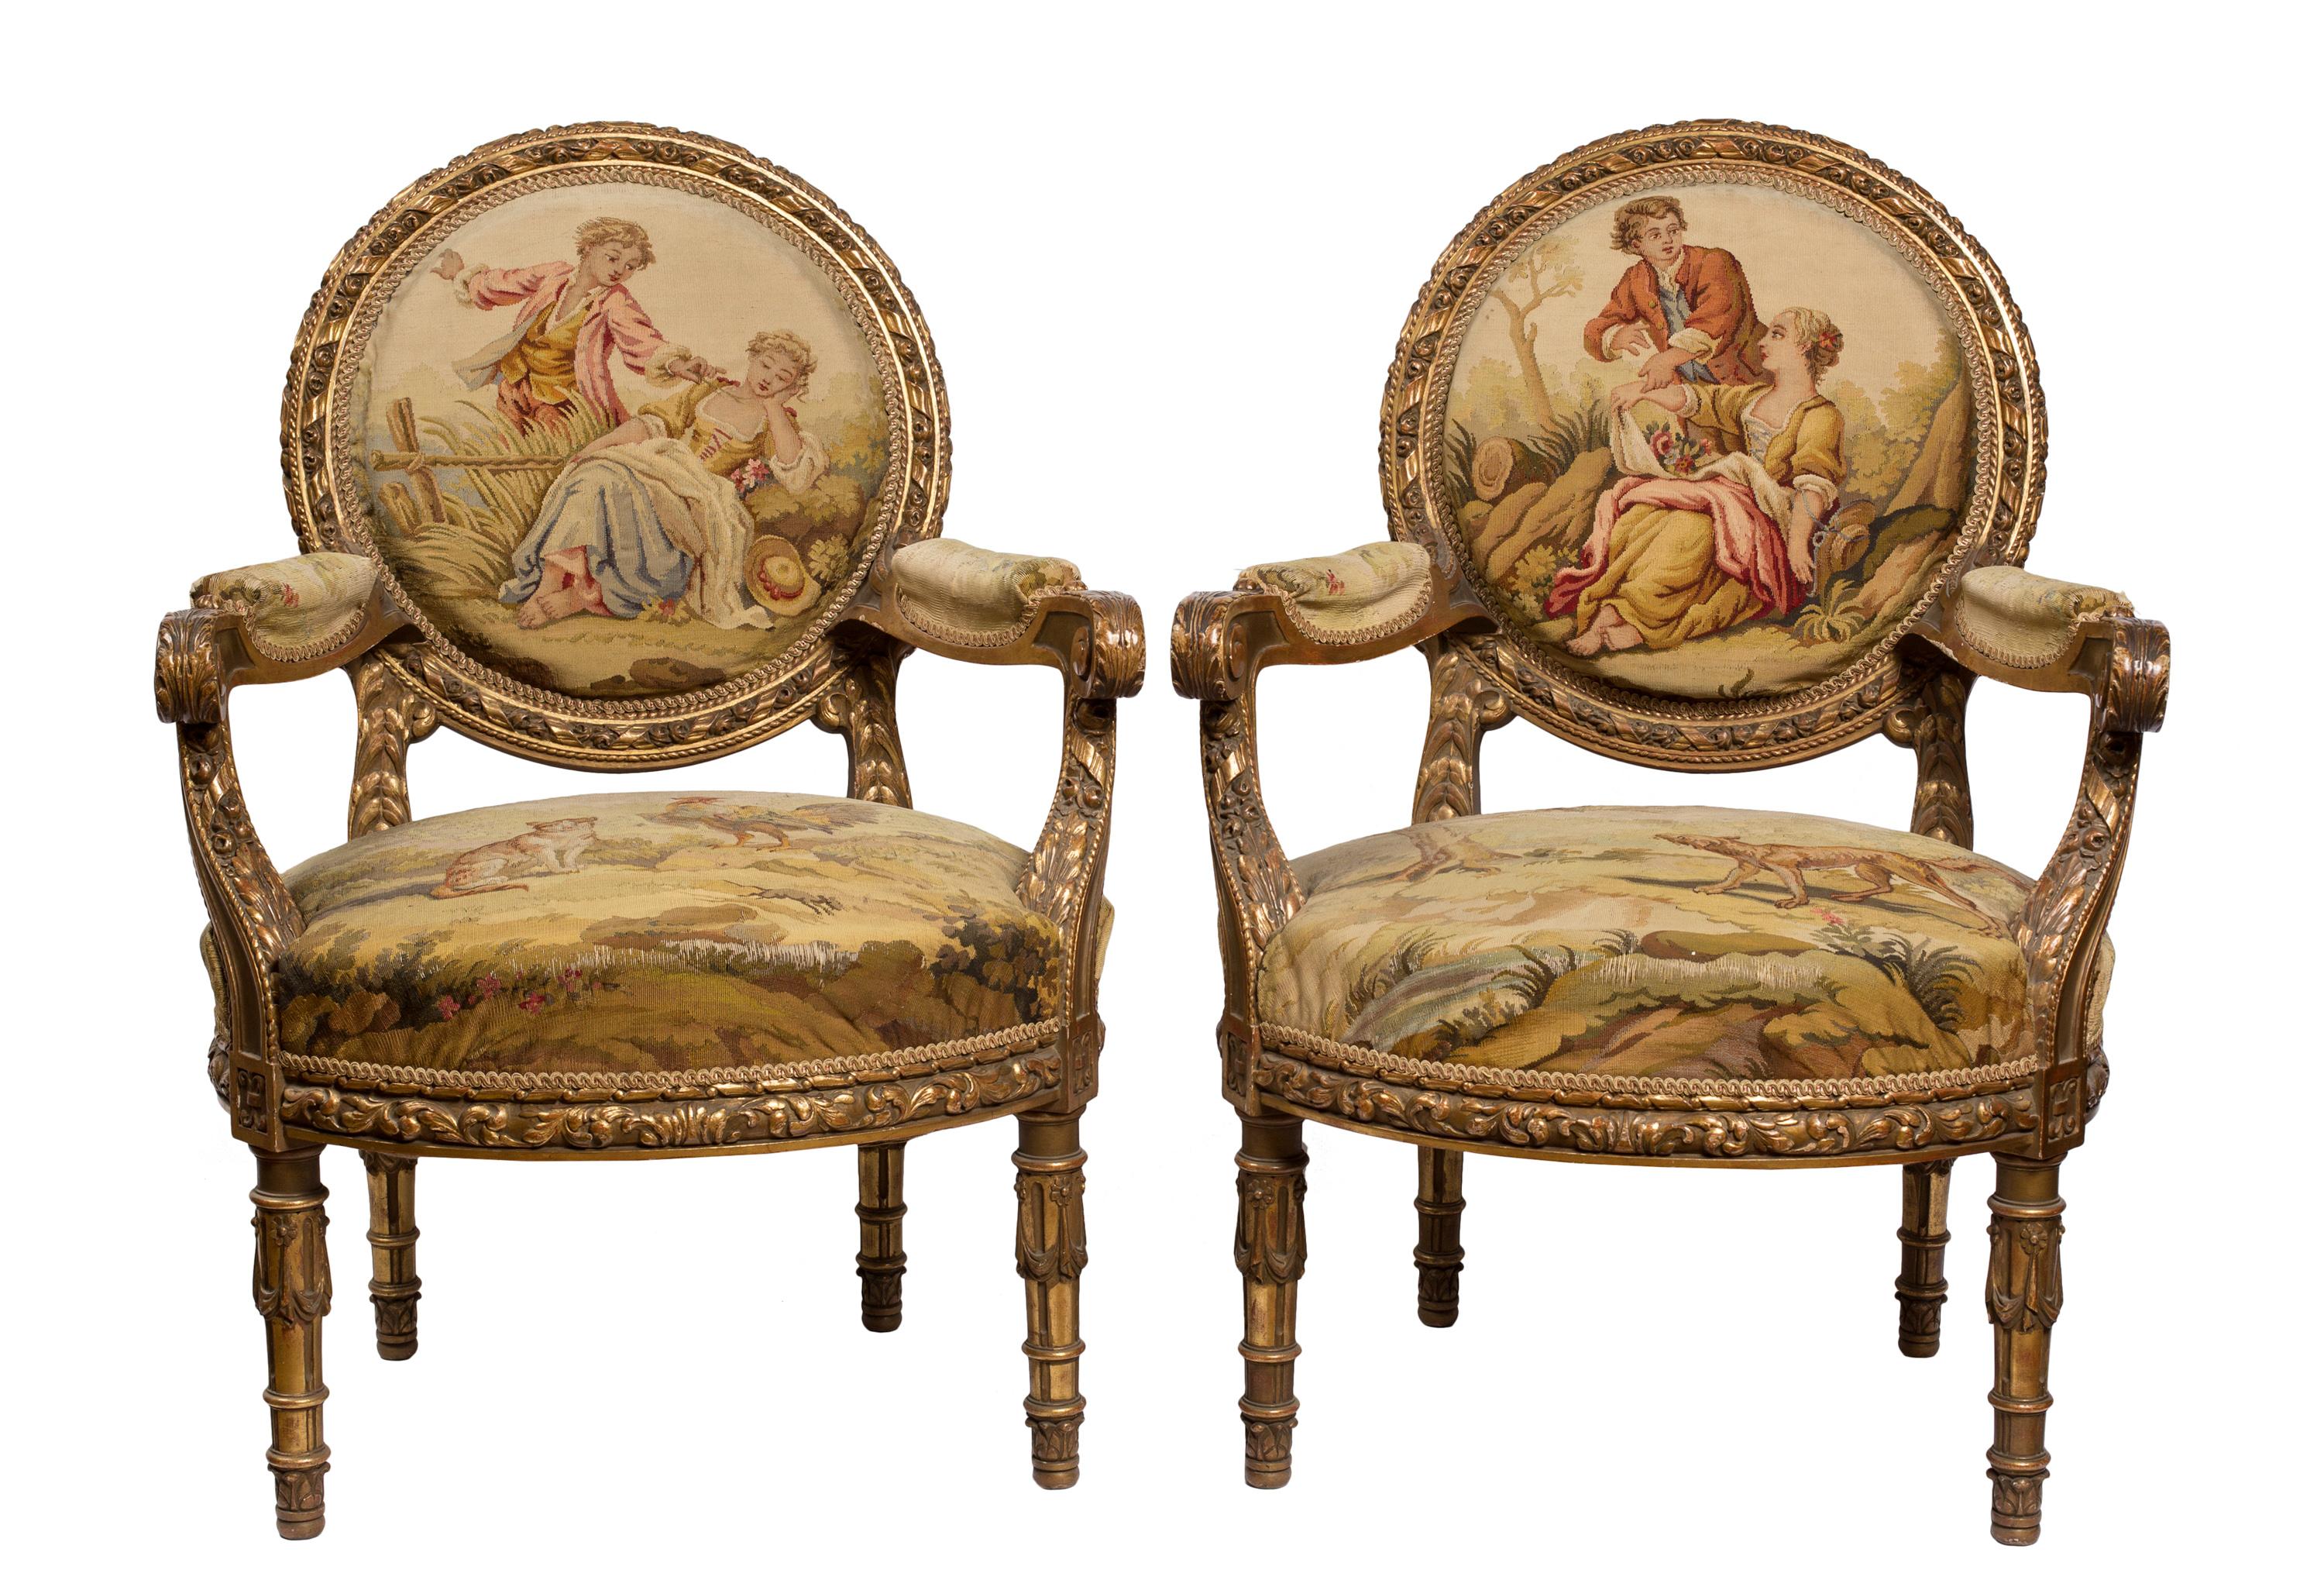 Louis XVI 19th C. French 3 Piece Giltwood Salon Suite, Settee, Pair Armchairs, Tapestry For Sale